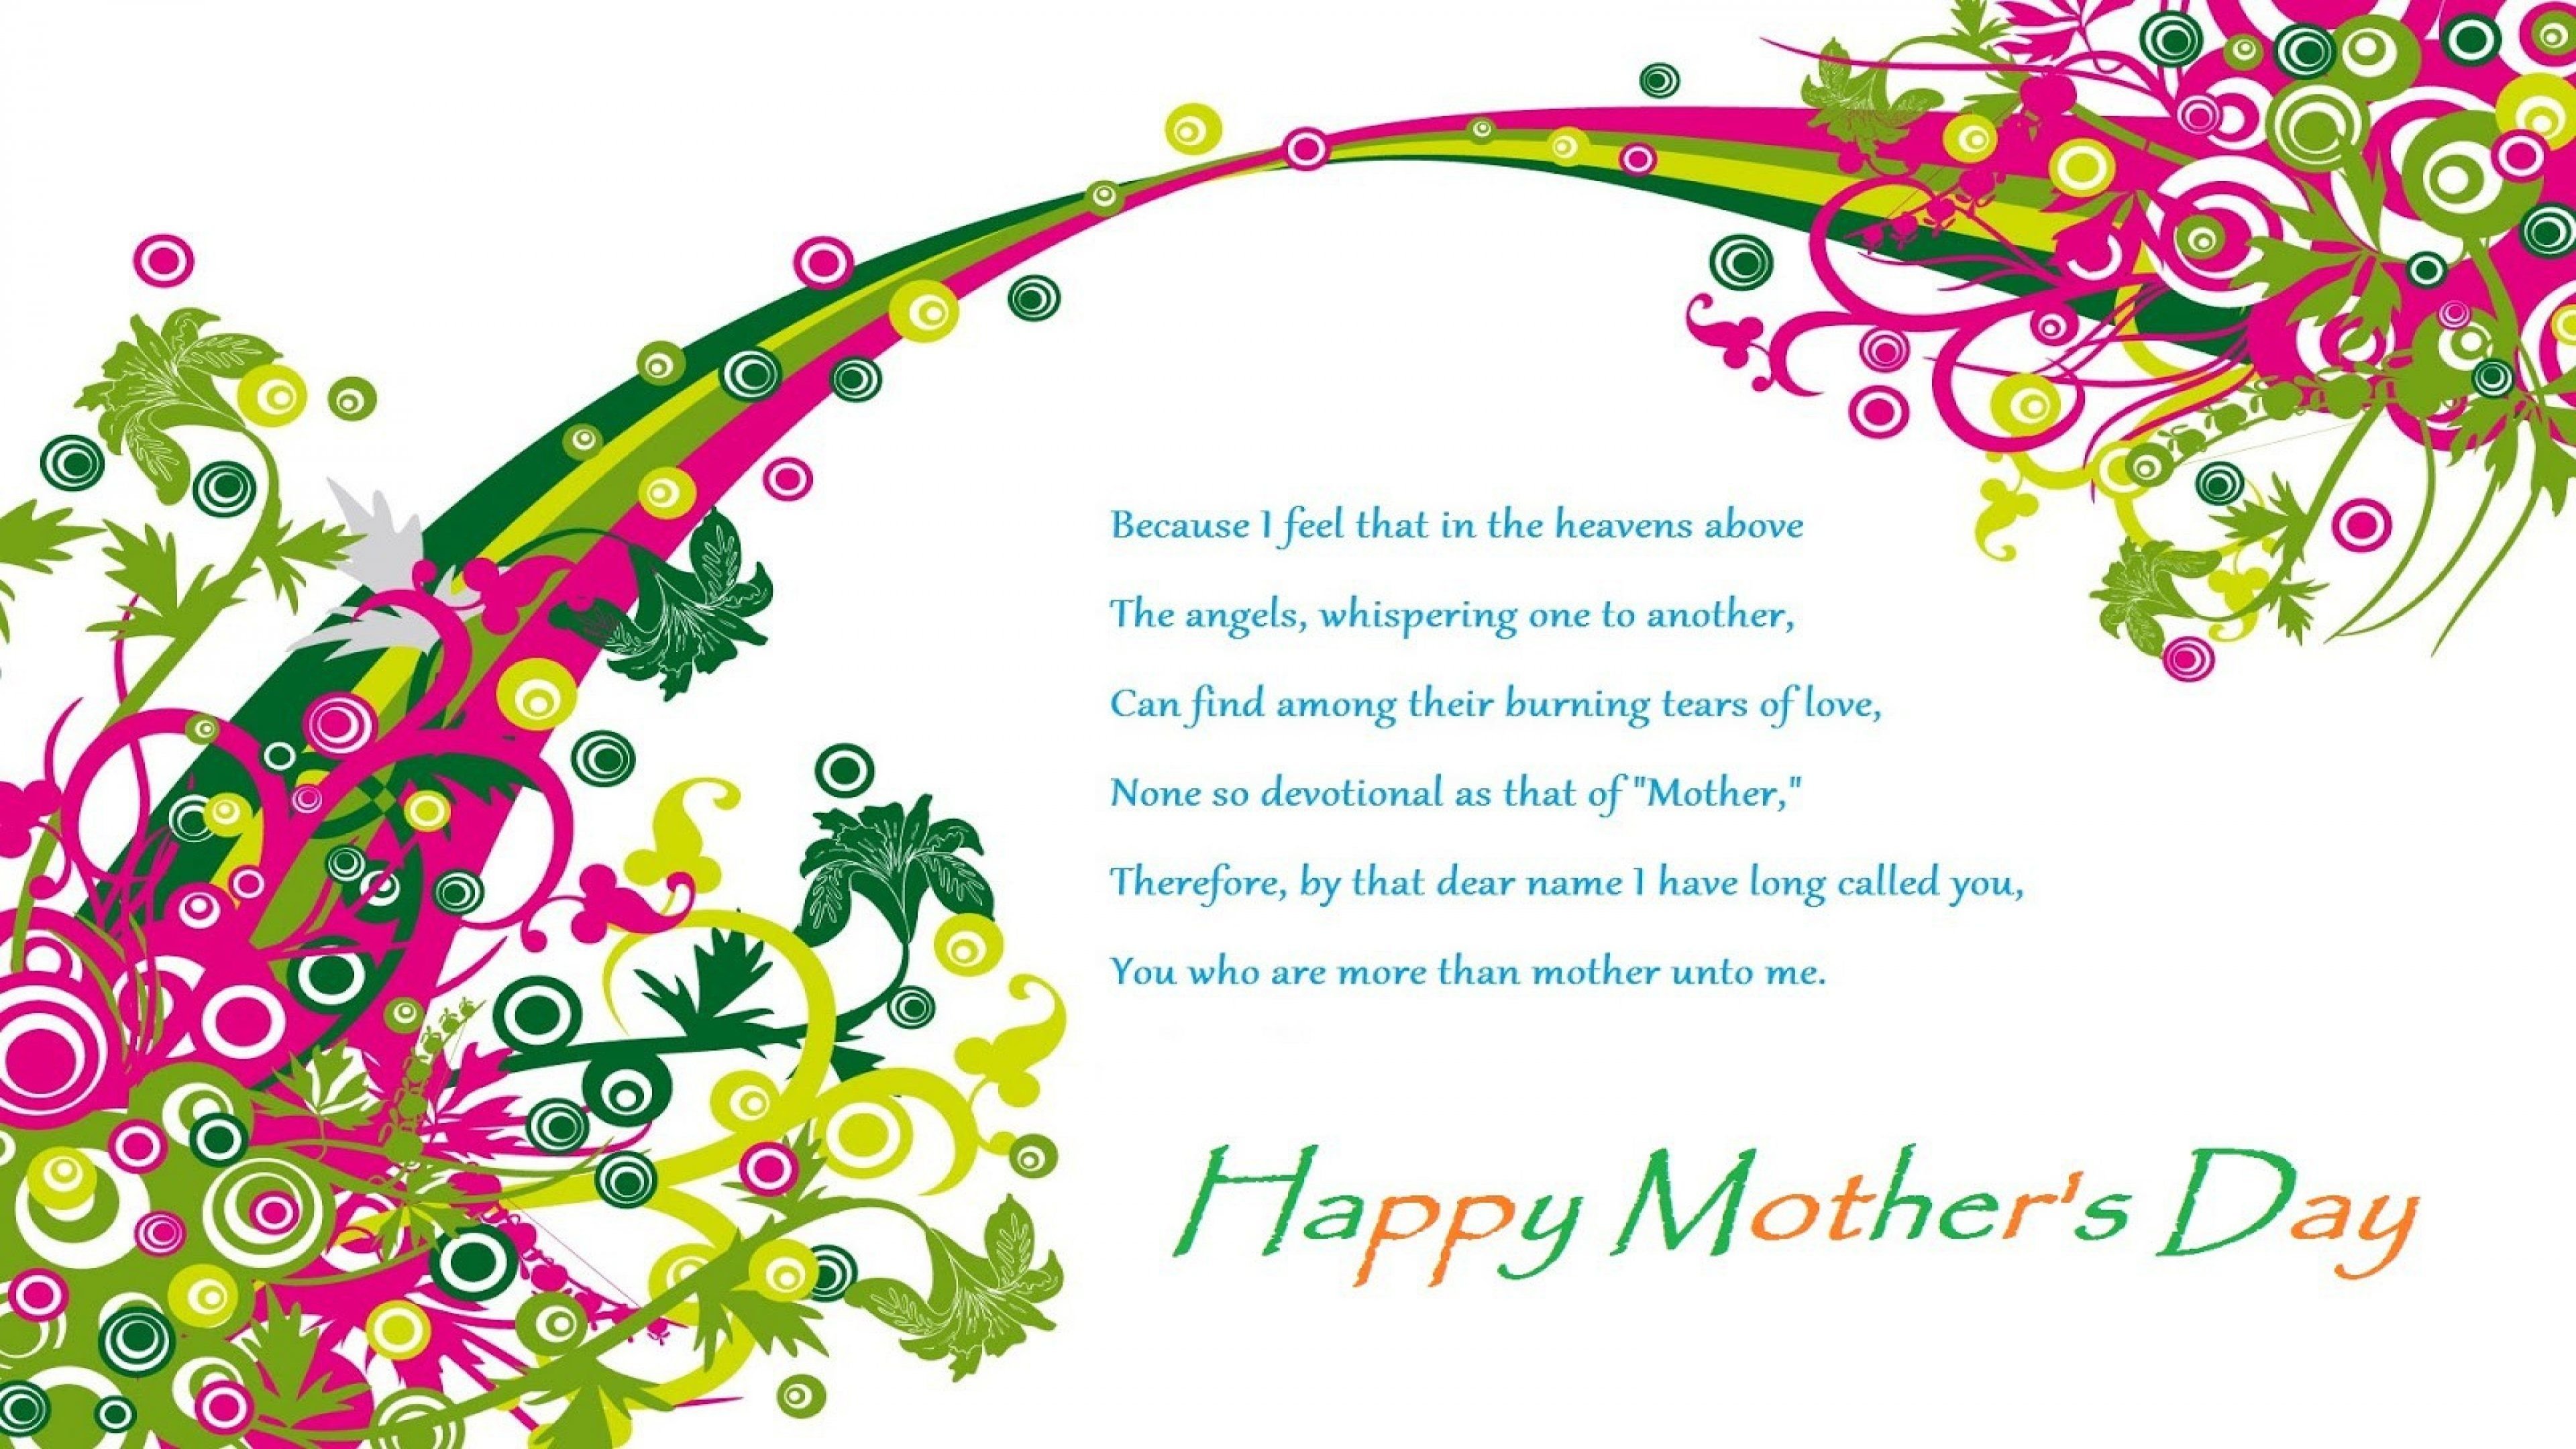 Happy Mother S Day Poem Greetings Image Wallpaper Everyone For Compliments HD Wallpaper